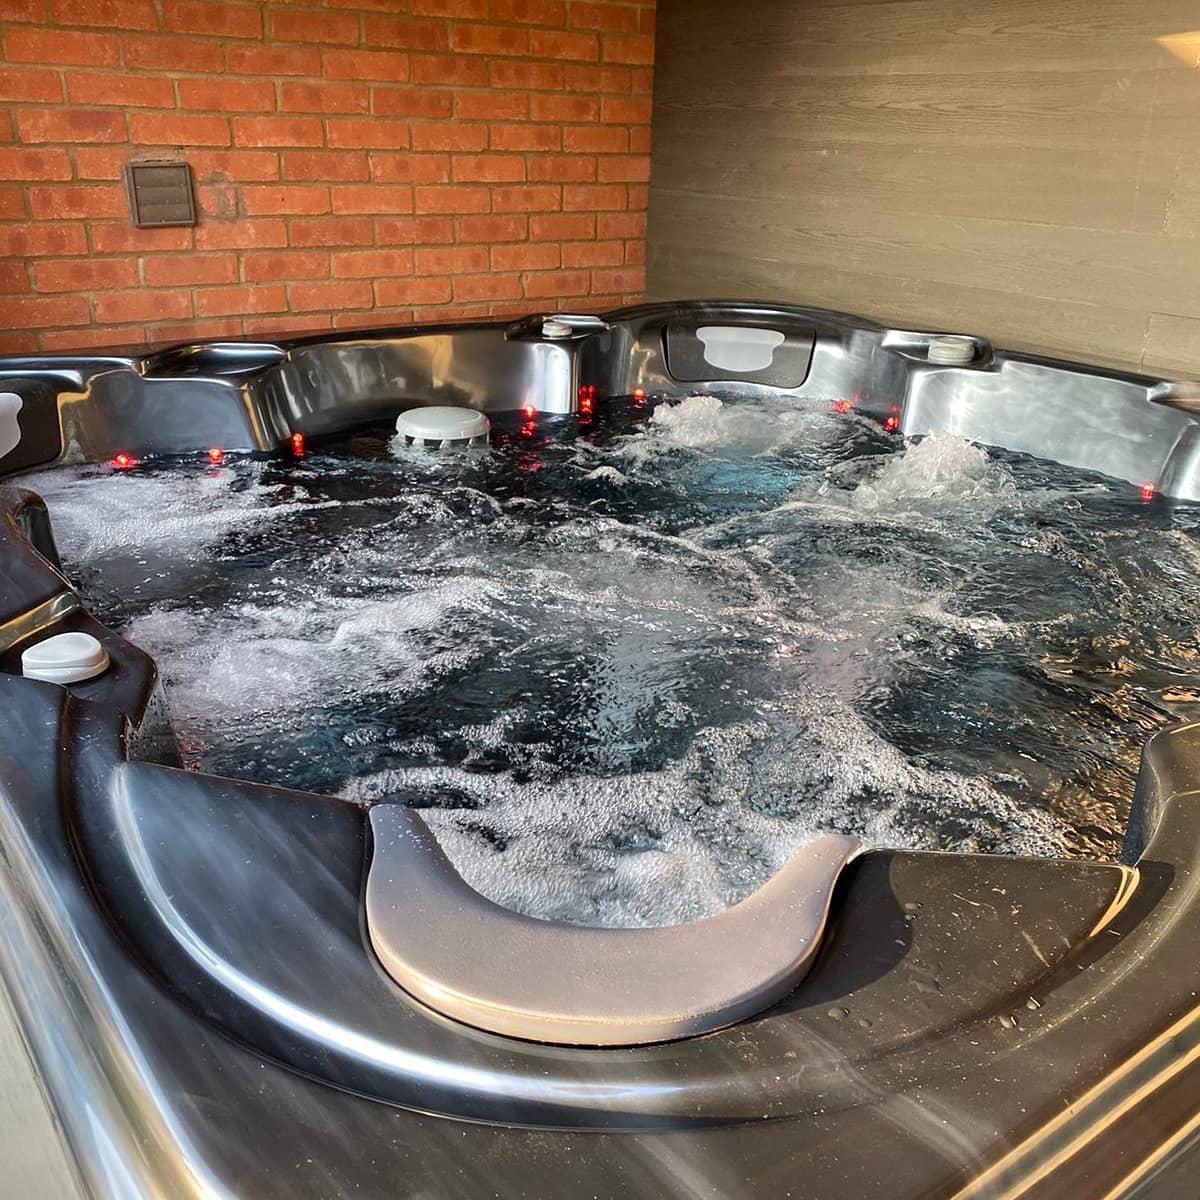 Tropic 7 Seater Hot Tub - Vookoo Lifestyle